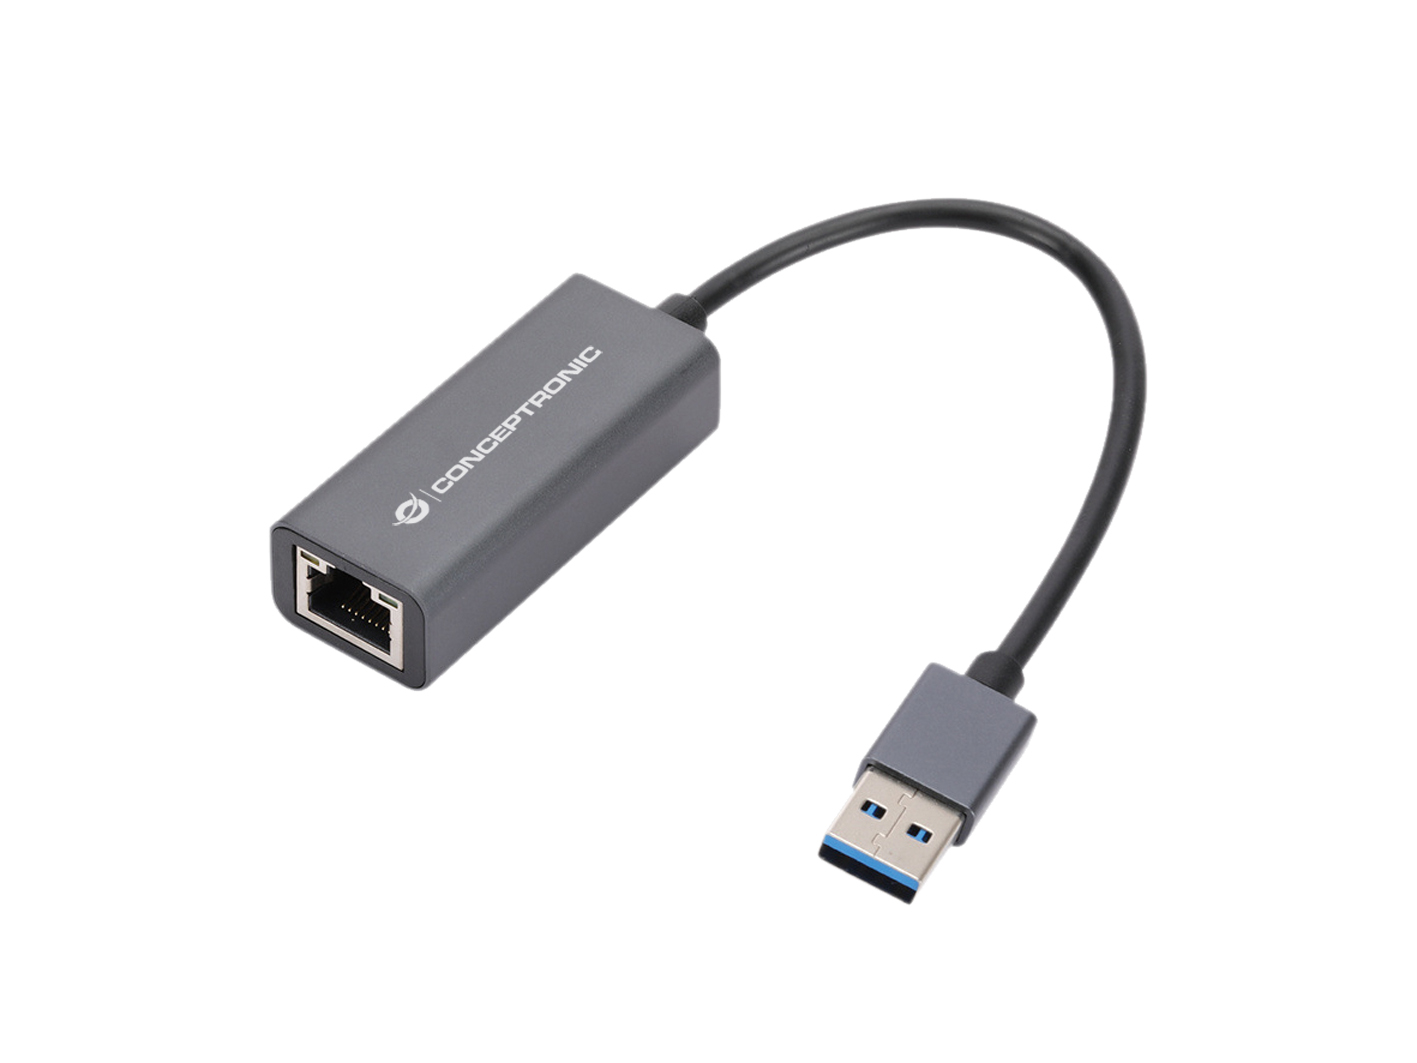 LevelOne Conceptronic ABBY08G Gigabit USB 3.0 Network Adapter; Wake-on-LAN; Compatible with Nintendo Switch - 10/100/1000Mbps wire speed transmission and reception; Built-in Wake-on-LAN feature to startup computers remotely; Supports Nintendo Switch witho